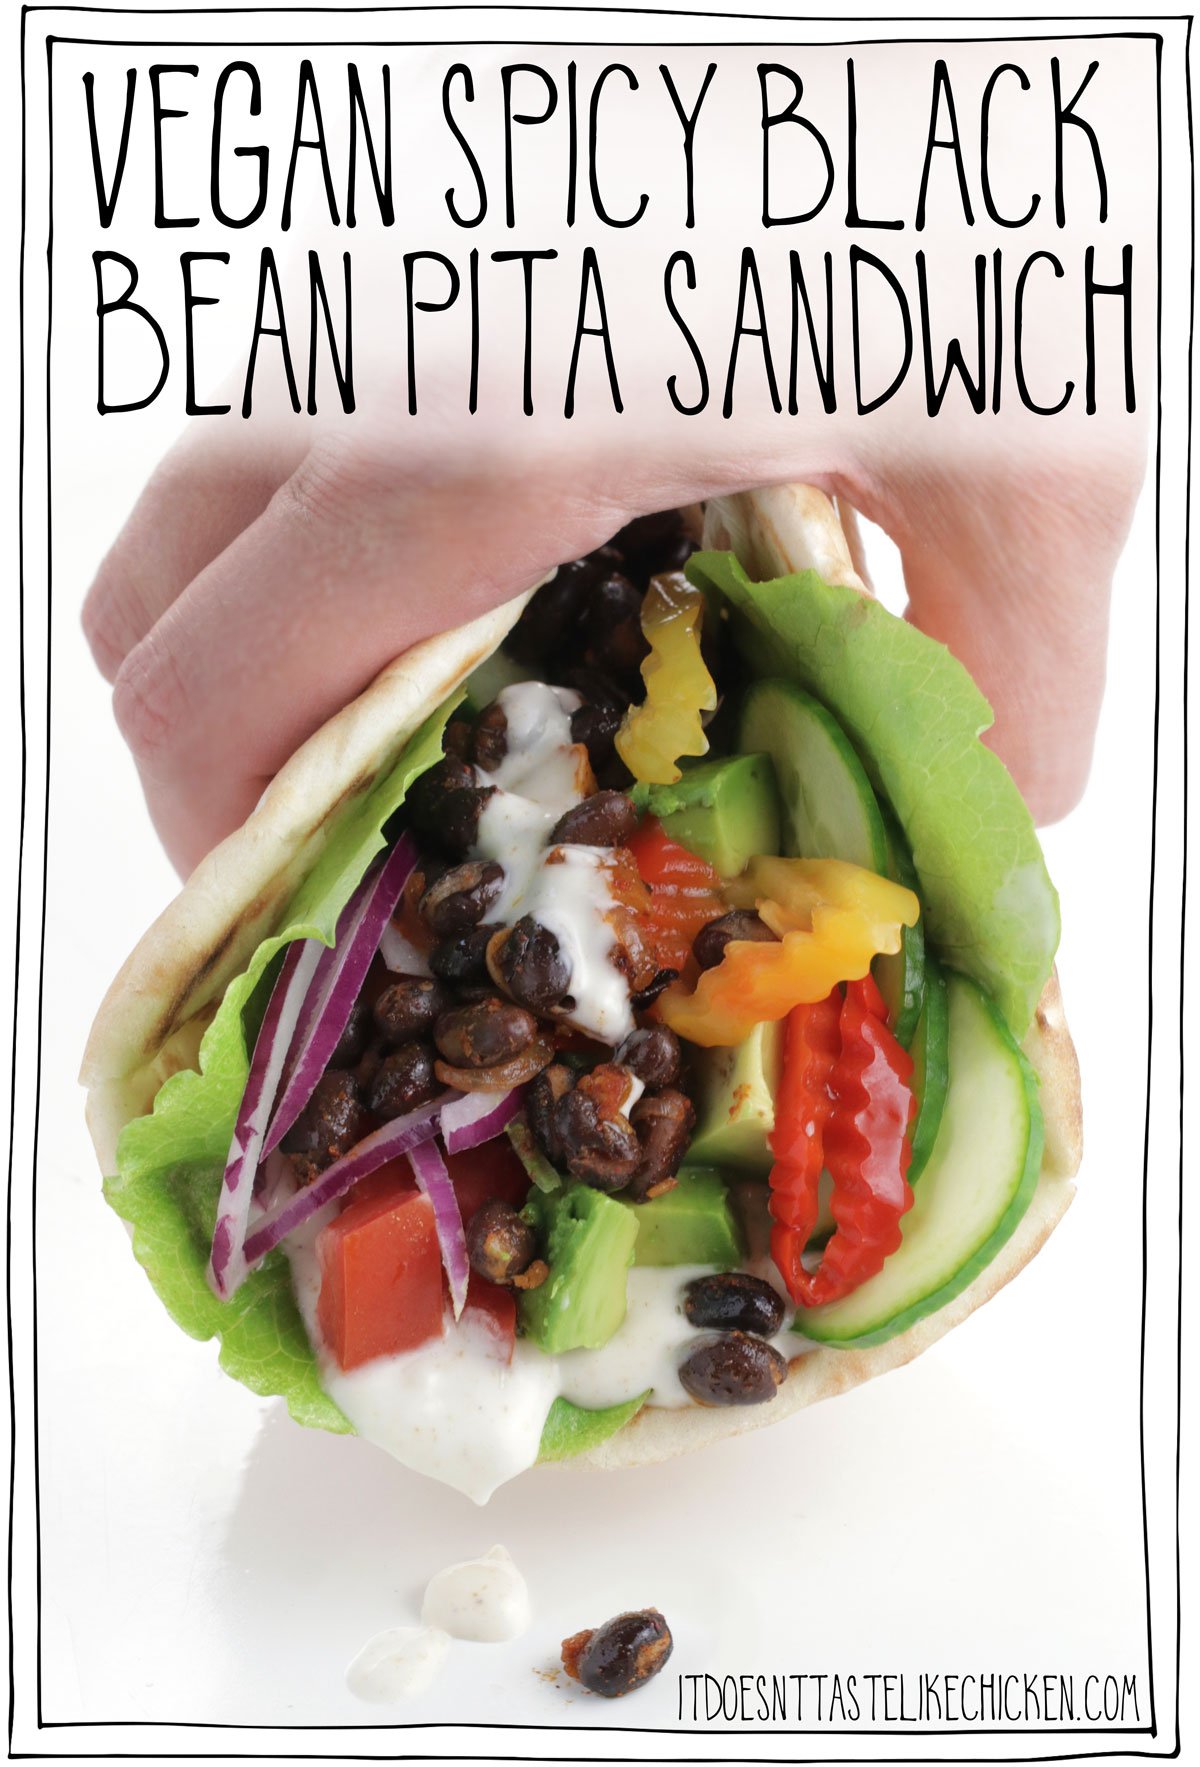 Vegan Spicy Black Bean Pita Sandwich! This 20-minute vegan pita is next-level delicious! With spicy black beans, a creamy tangy mayo, and a mountain of fresh veg, this is the perfect hearty vegan sandwich the enjoy for lunch or dinner. These sandwiches can be made oil-free, gluten-free, and if you don't have any pitas on hand, feel free to load all of these toppings into a wrap or on your favourite sandwich bread. #itdoesnttastelikechicken #veganrecipes